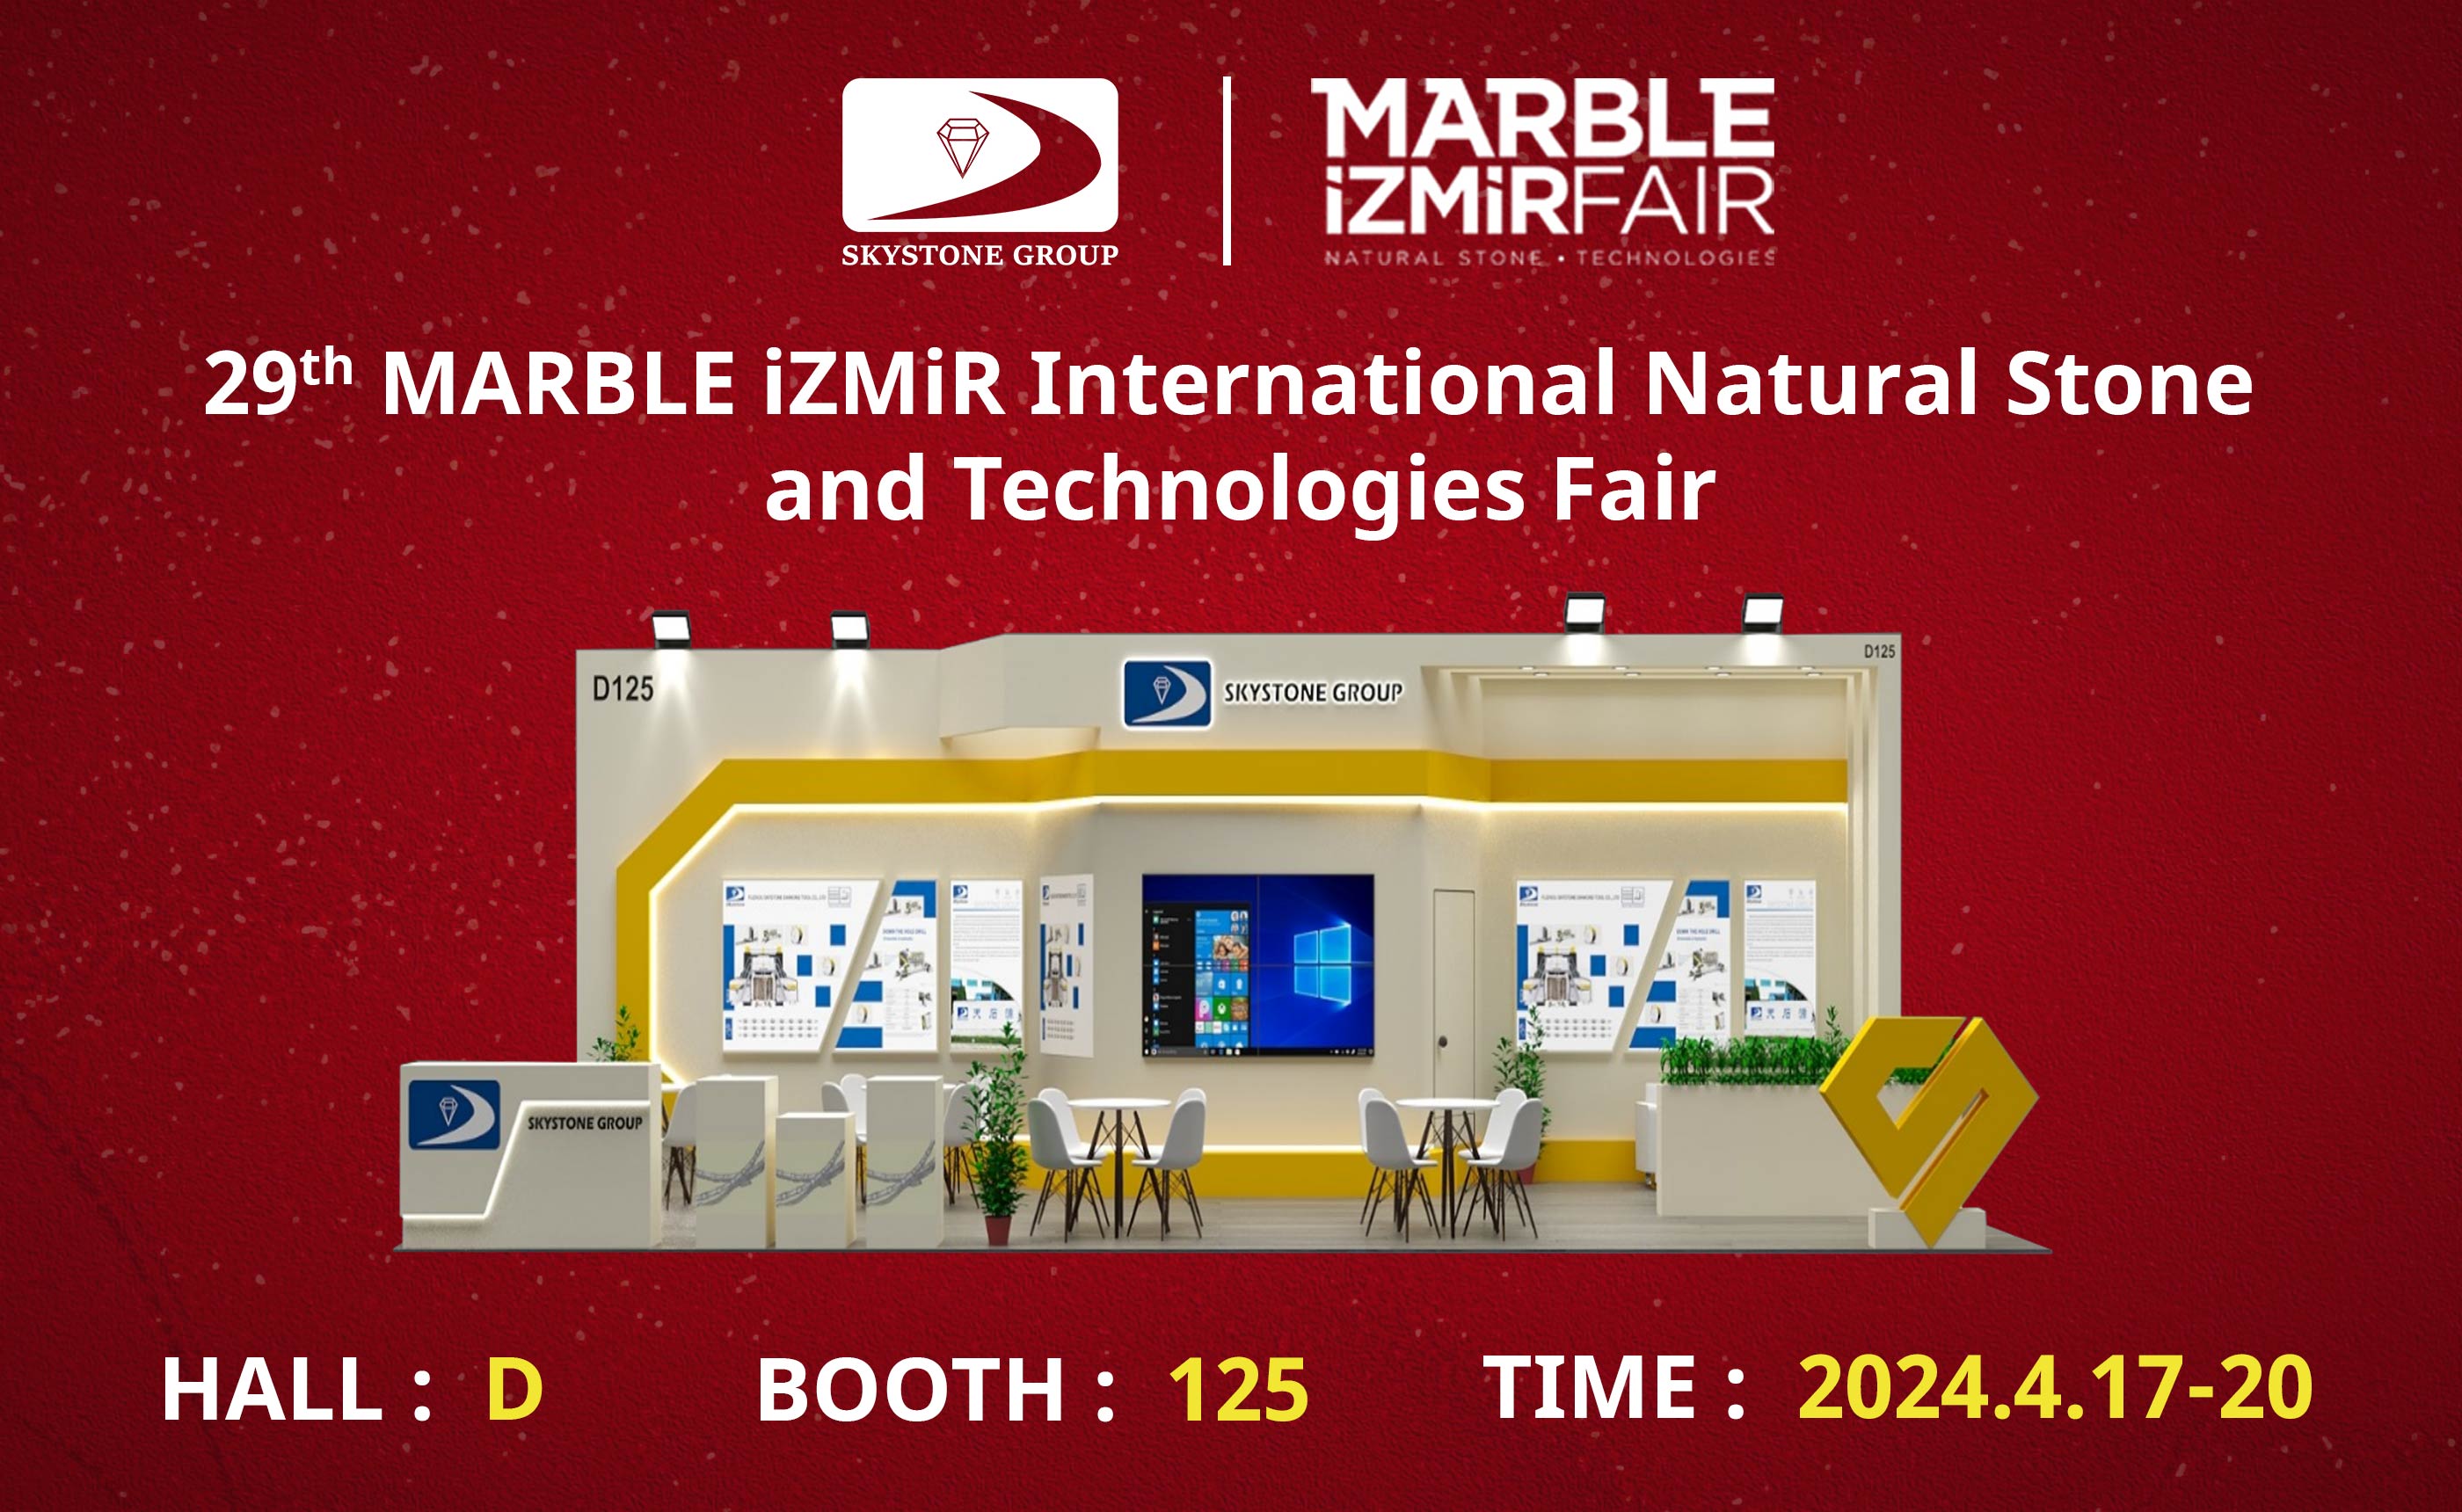 Welcome to the 29th MARBLE Izmir International Natural Stone and Technologies Fair!